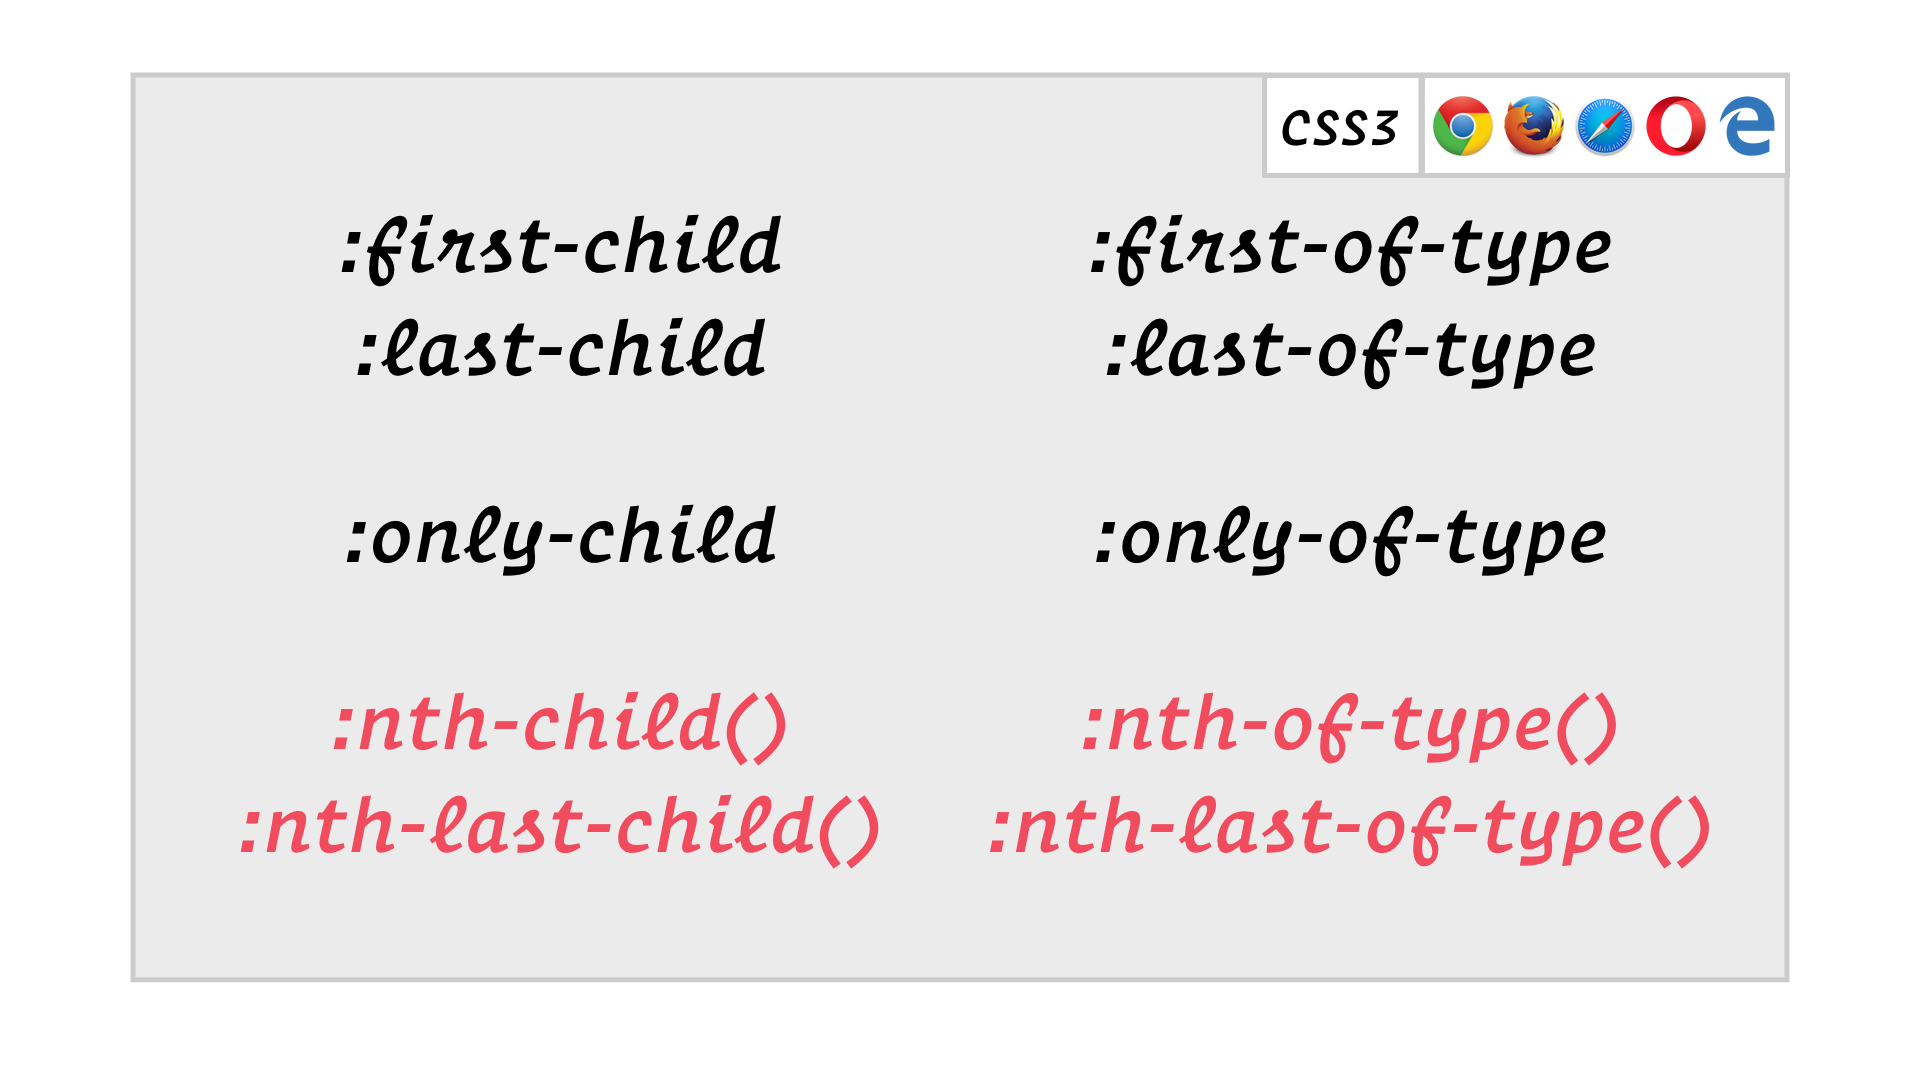 slide: :first-child, :last-child, :only-child, :first-of-type, :last-of-type, :only-of-type, and highlighted: :nth-child(), :nth-last-child(), :nth-of-type() and :nth-last-of-type()